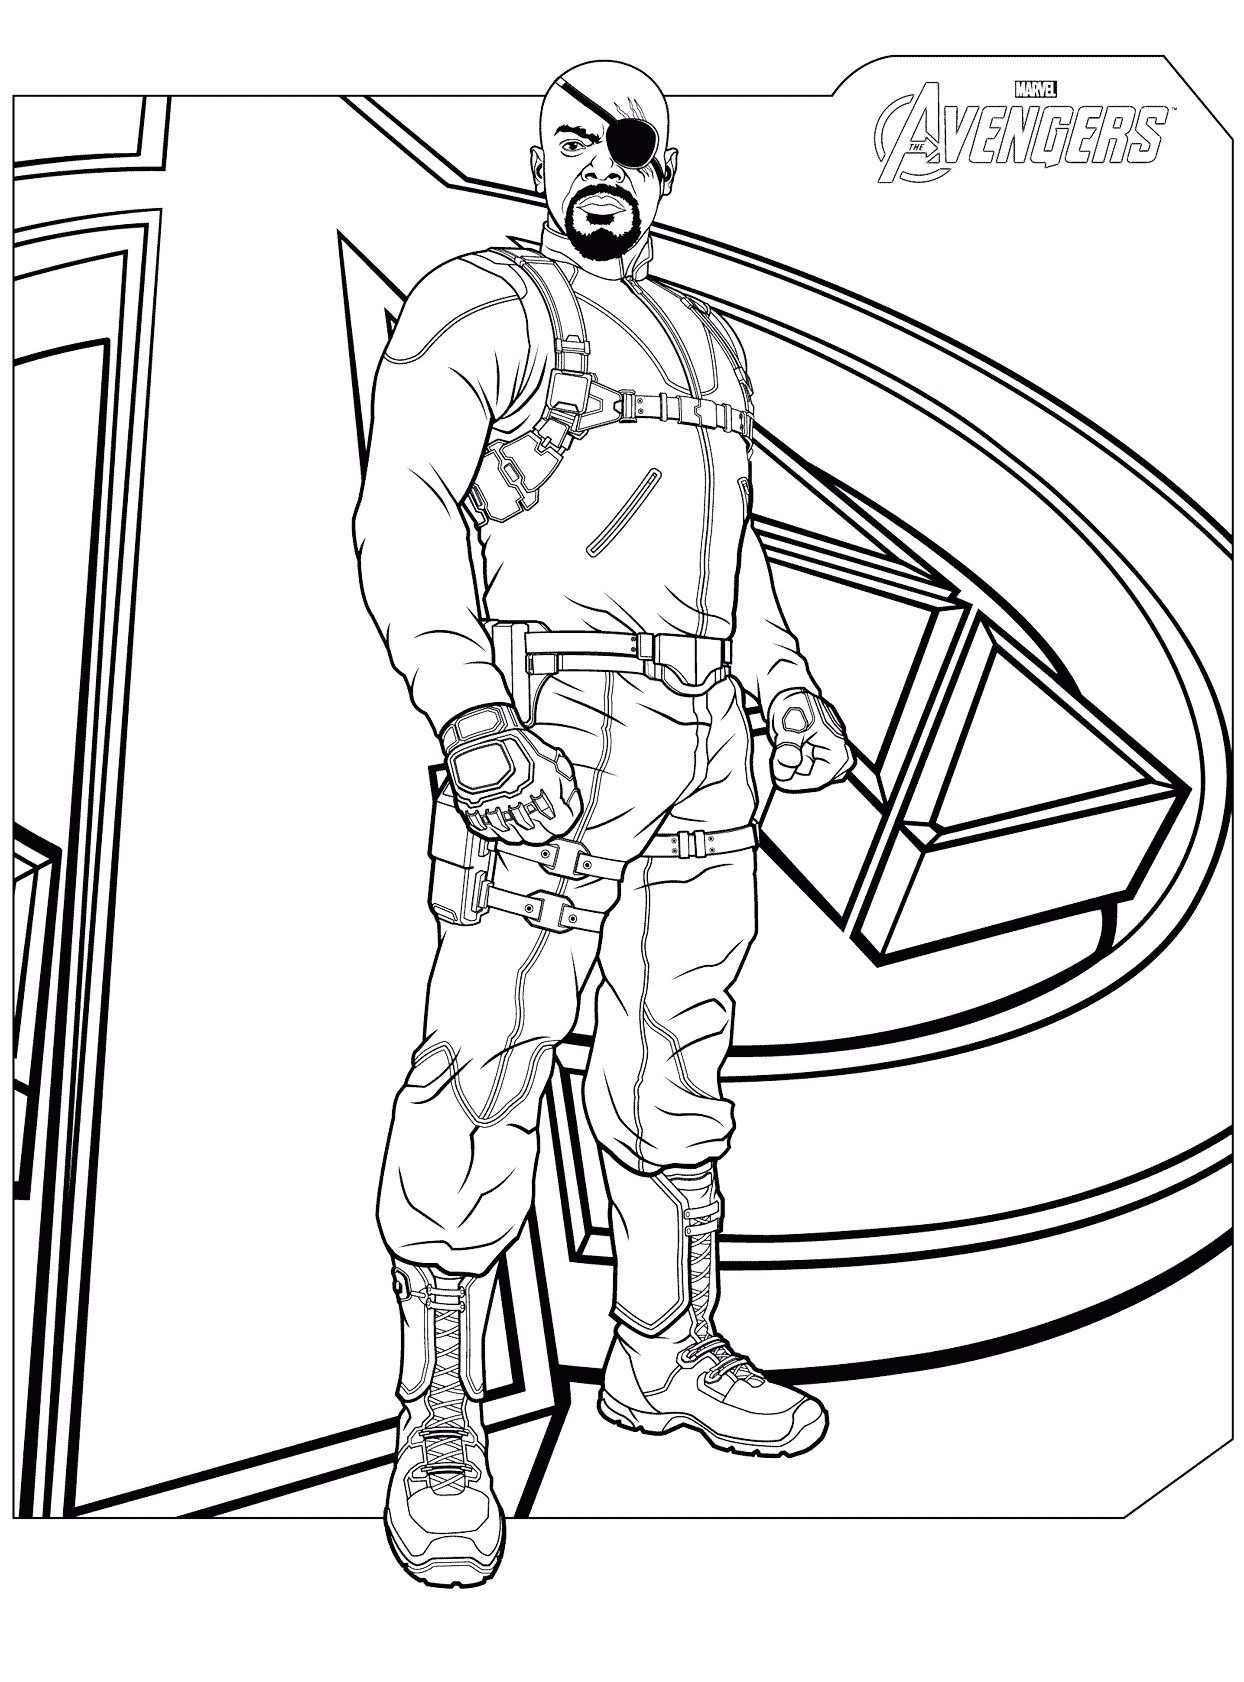 Coloring Rocks Avengers Coloring Avengers Coloring Pages Marvel Coloring